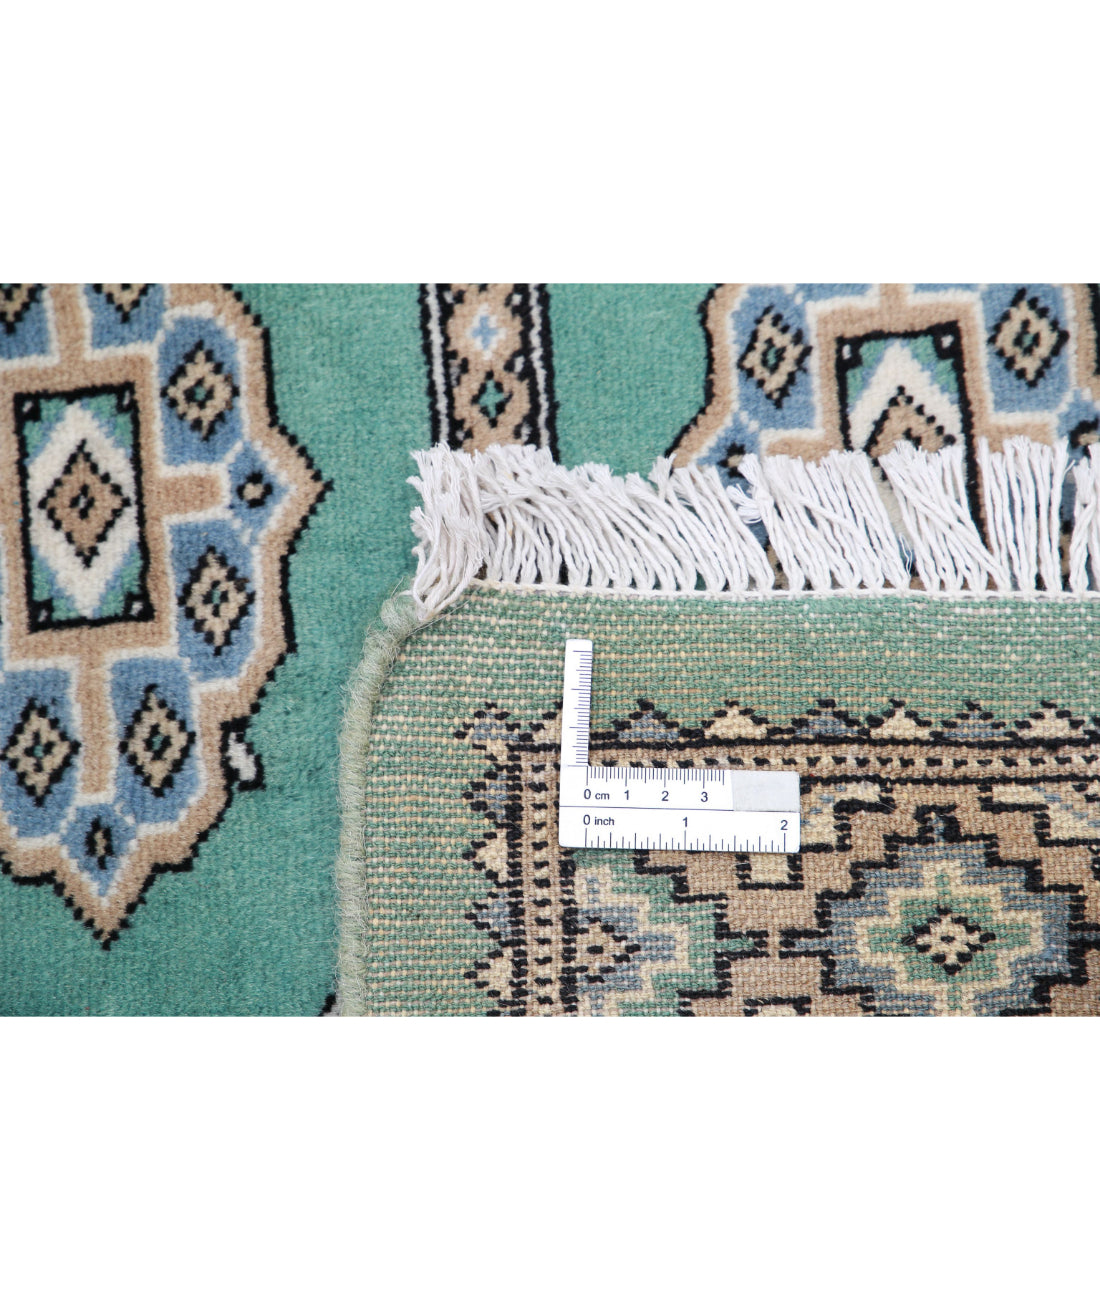 Hand Knotted Tribal Bokhara Wool Rug - 6'10'' x 7'9'' 6'10'' x 7'9'' (205 X 233) / Green / Taupe